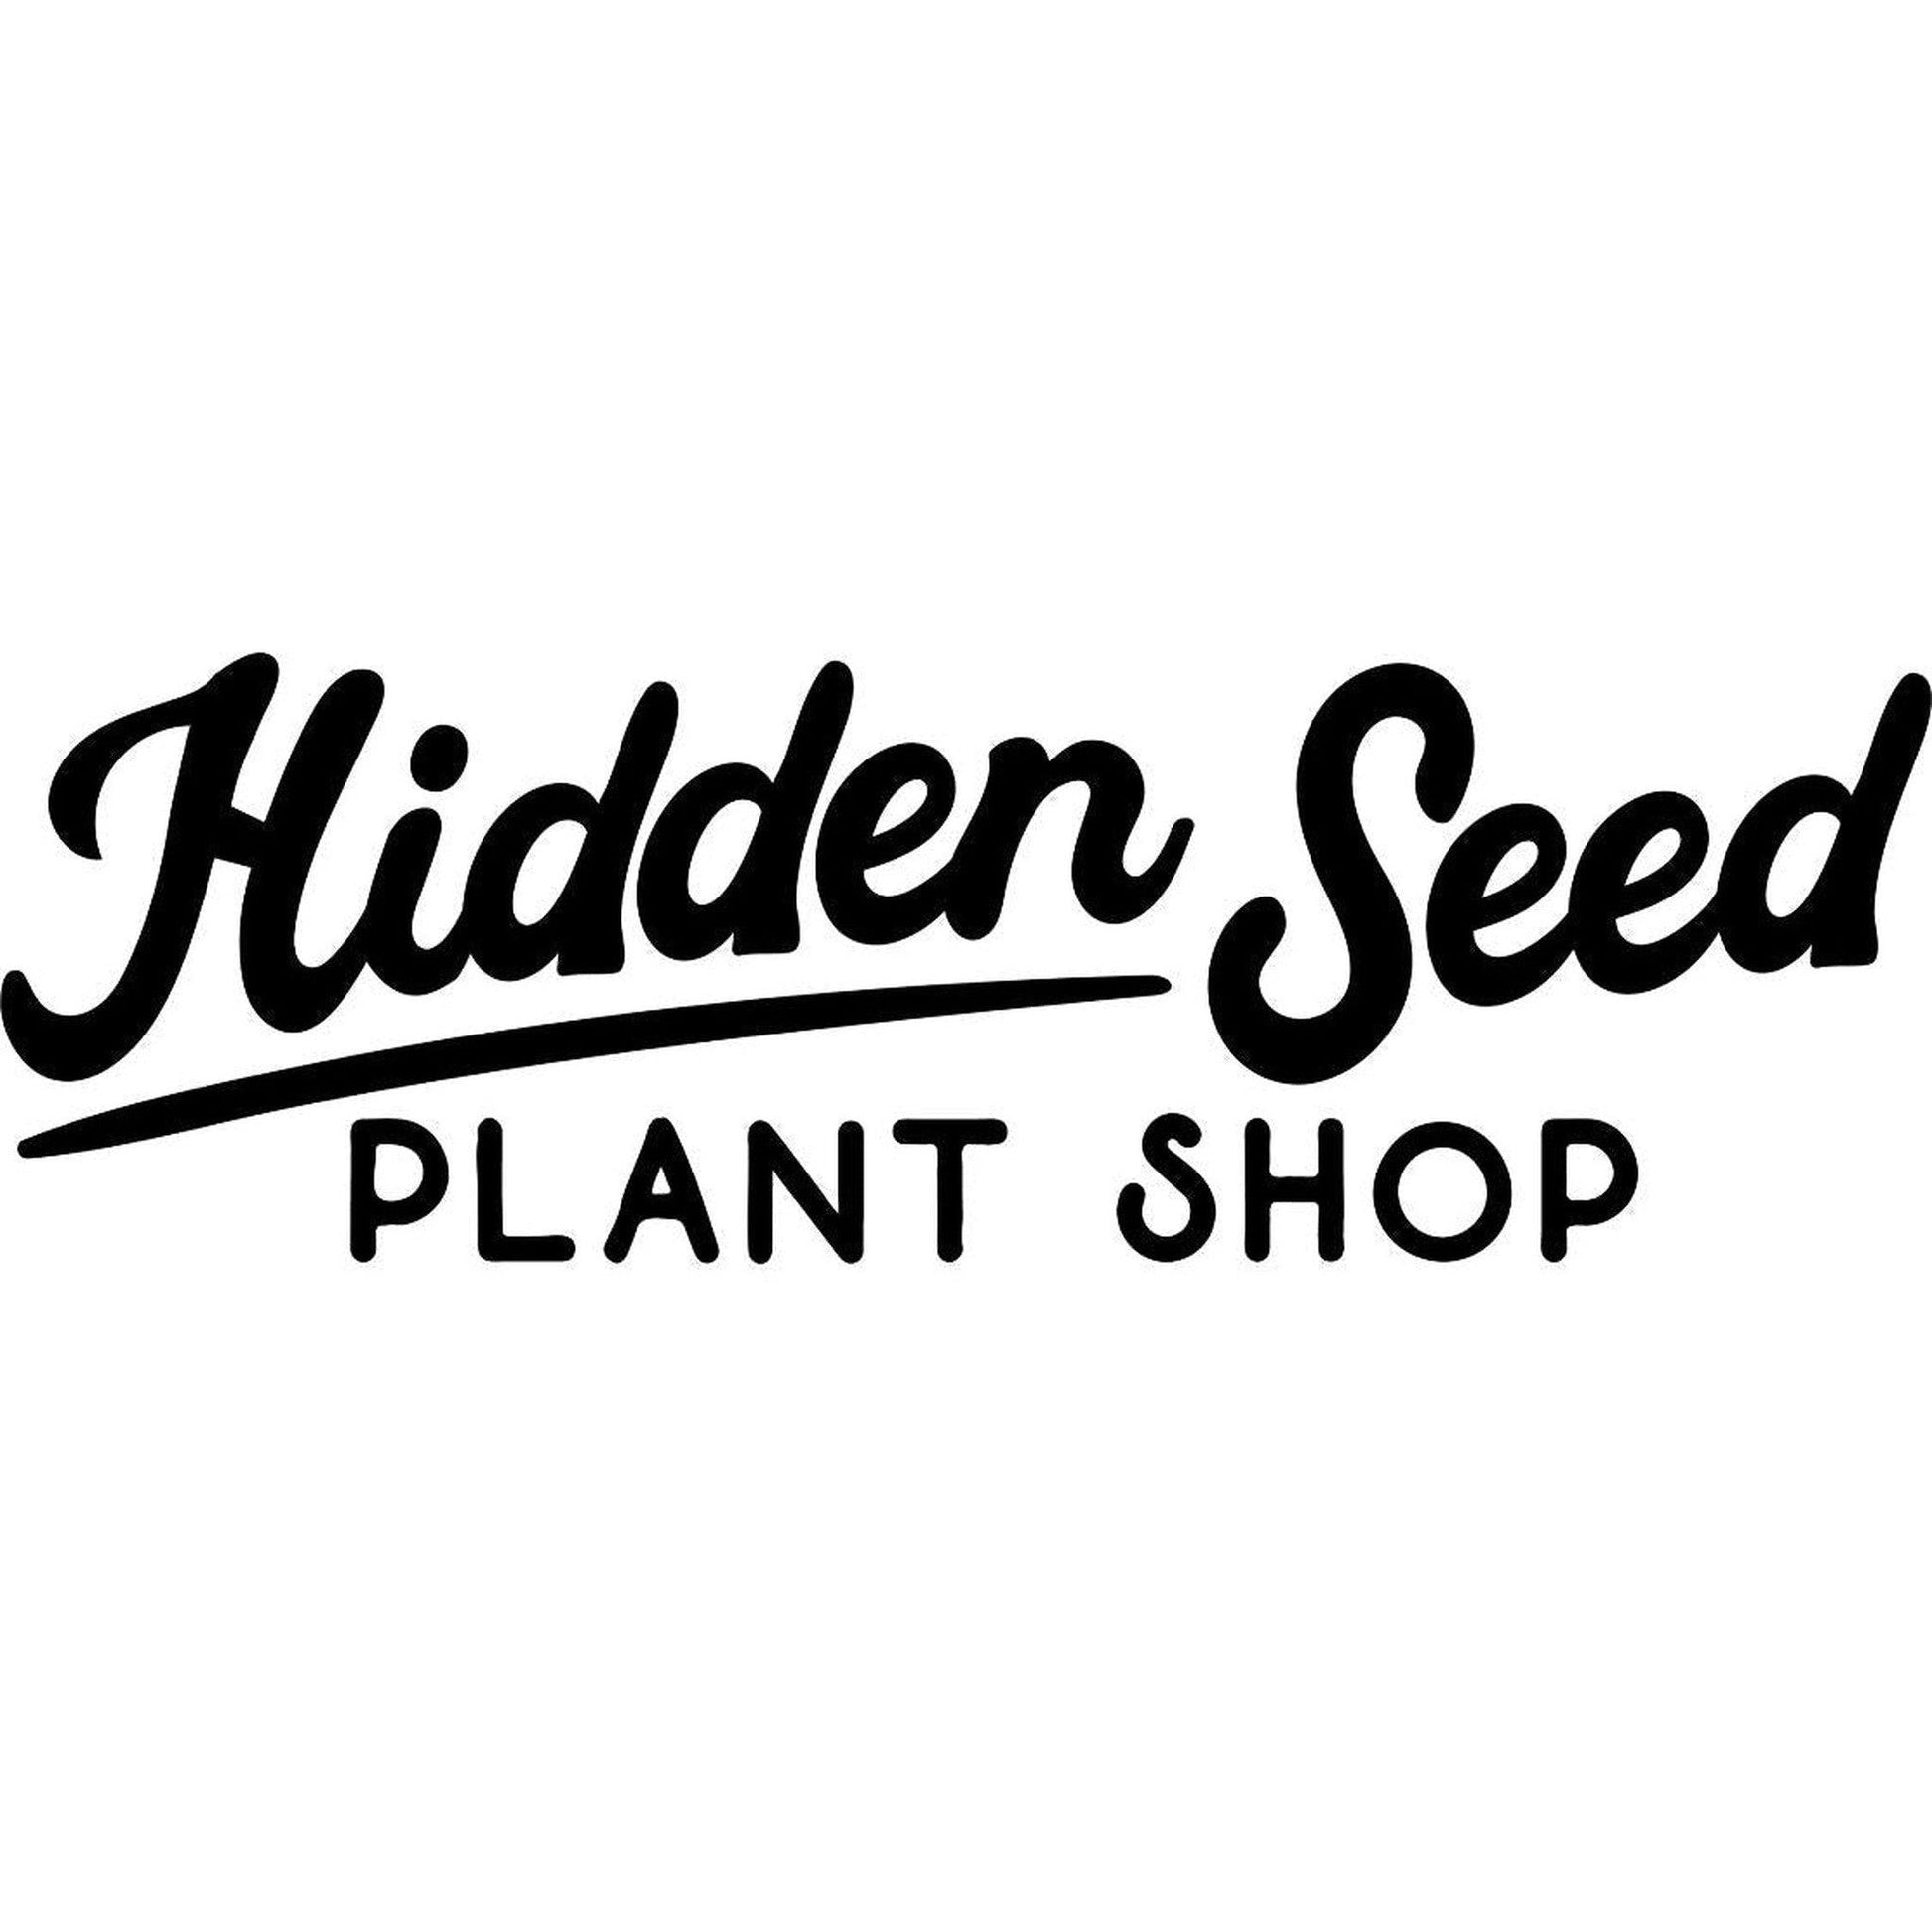 Shipping - Workaround-available at Hidden Seed Plant Shop